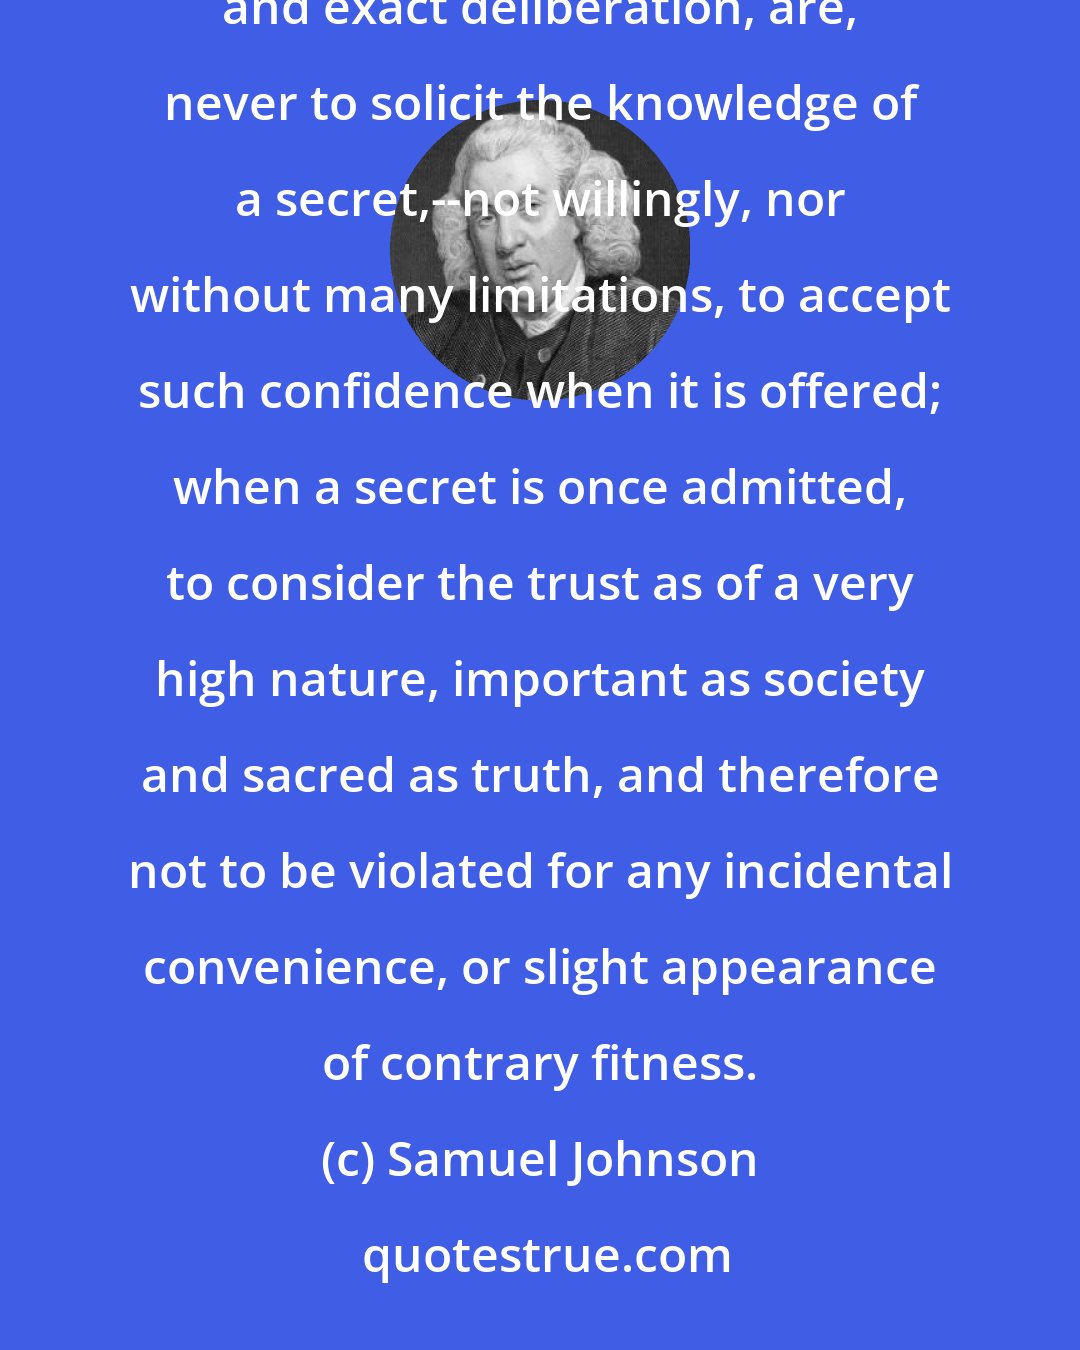 Samuel Johnson: The rules that I shall propose concerning secrecy, and from which I think it not safe to deviate without long and exact deliberation, are, never to solicit the knowledge of a secret,--not willingly, nor without many limitations, to accept such confidence when it is offered; when a secret is once admitted, to consider the trust as of a very high nature, important as society and sacred as truth, and therefore not to be violated for any incidental convenience, or slight appearance of contrary fitness.